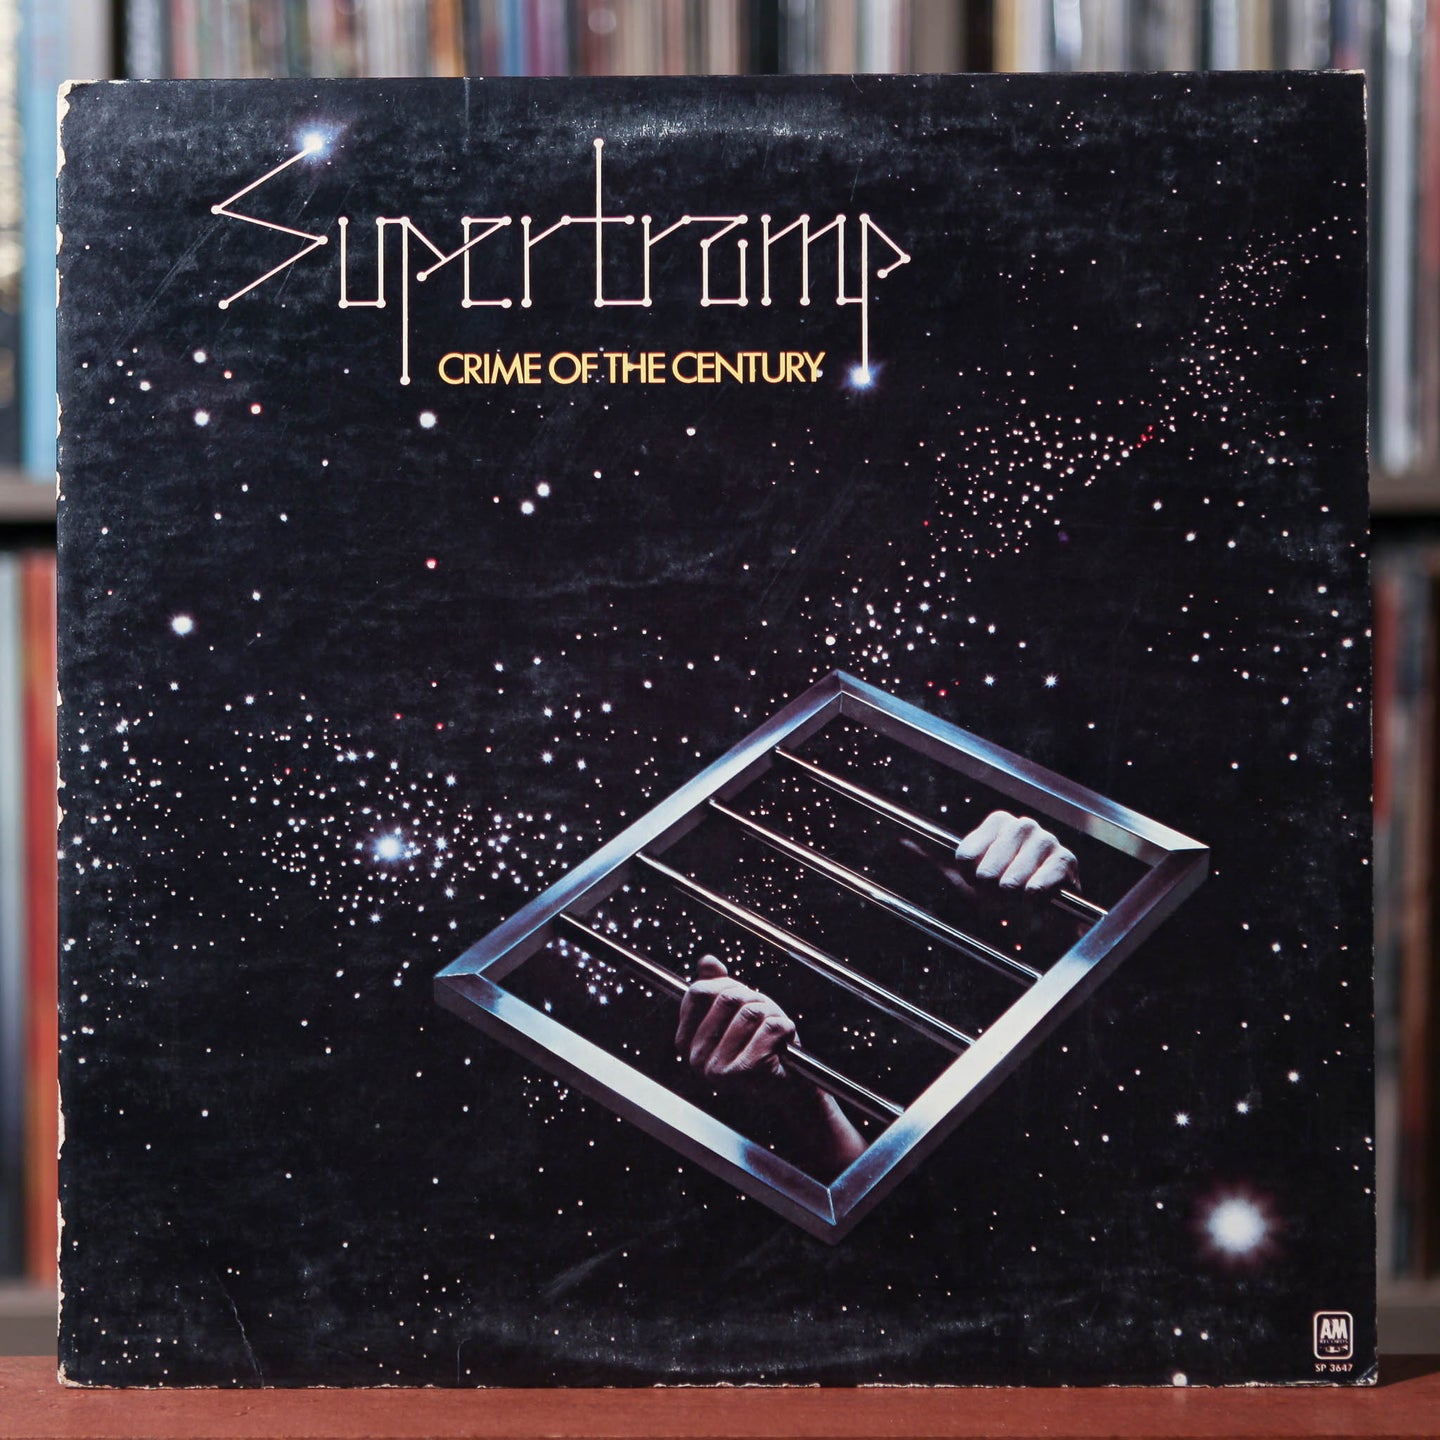 Supertramp - Crime Of The Century - 1973 A&M, VG/VG+